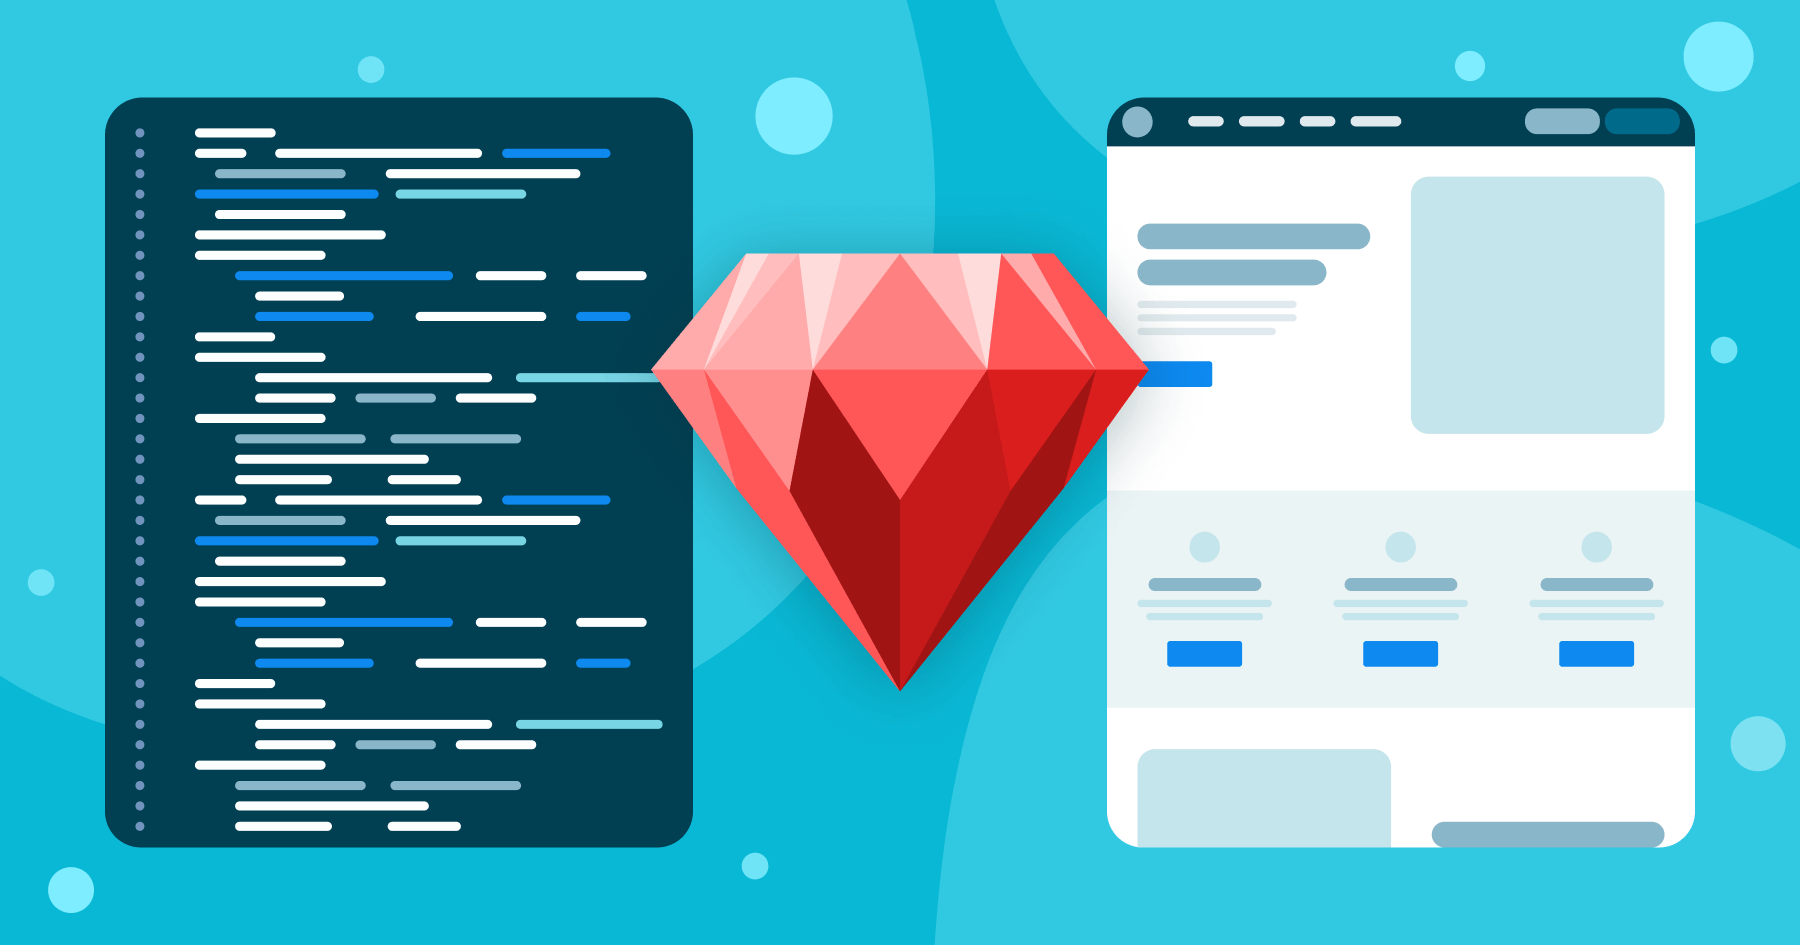 An Overview of the Ruby on Rails Framework and Its Features